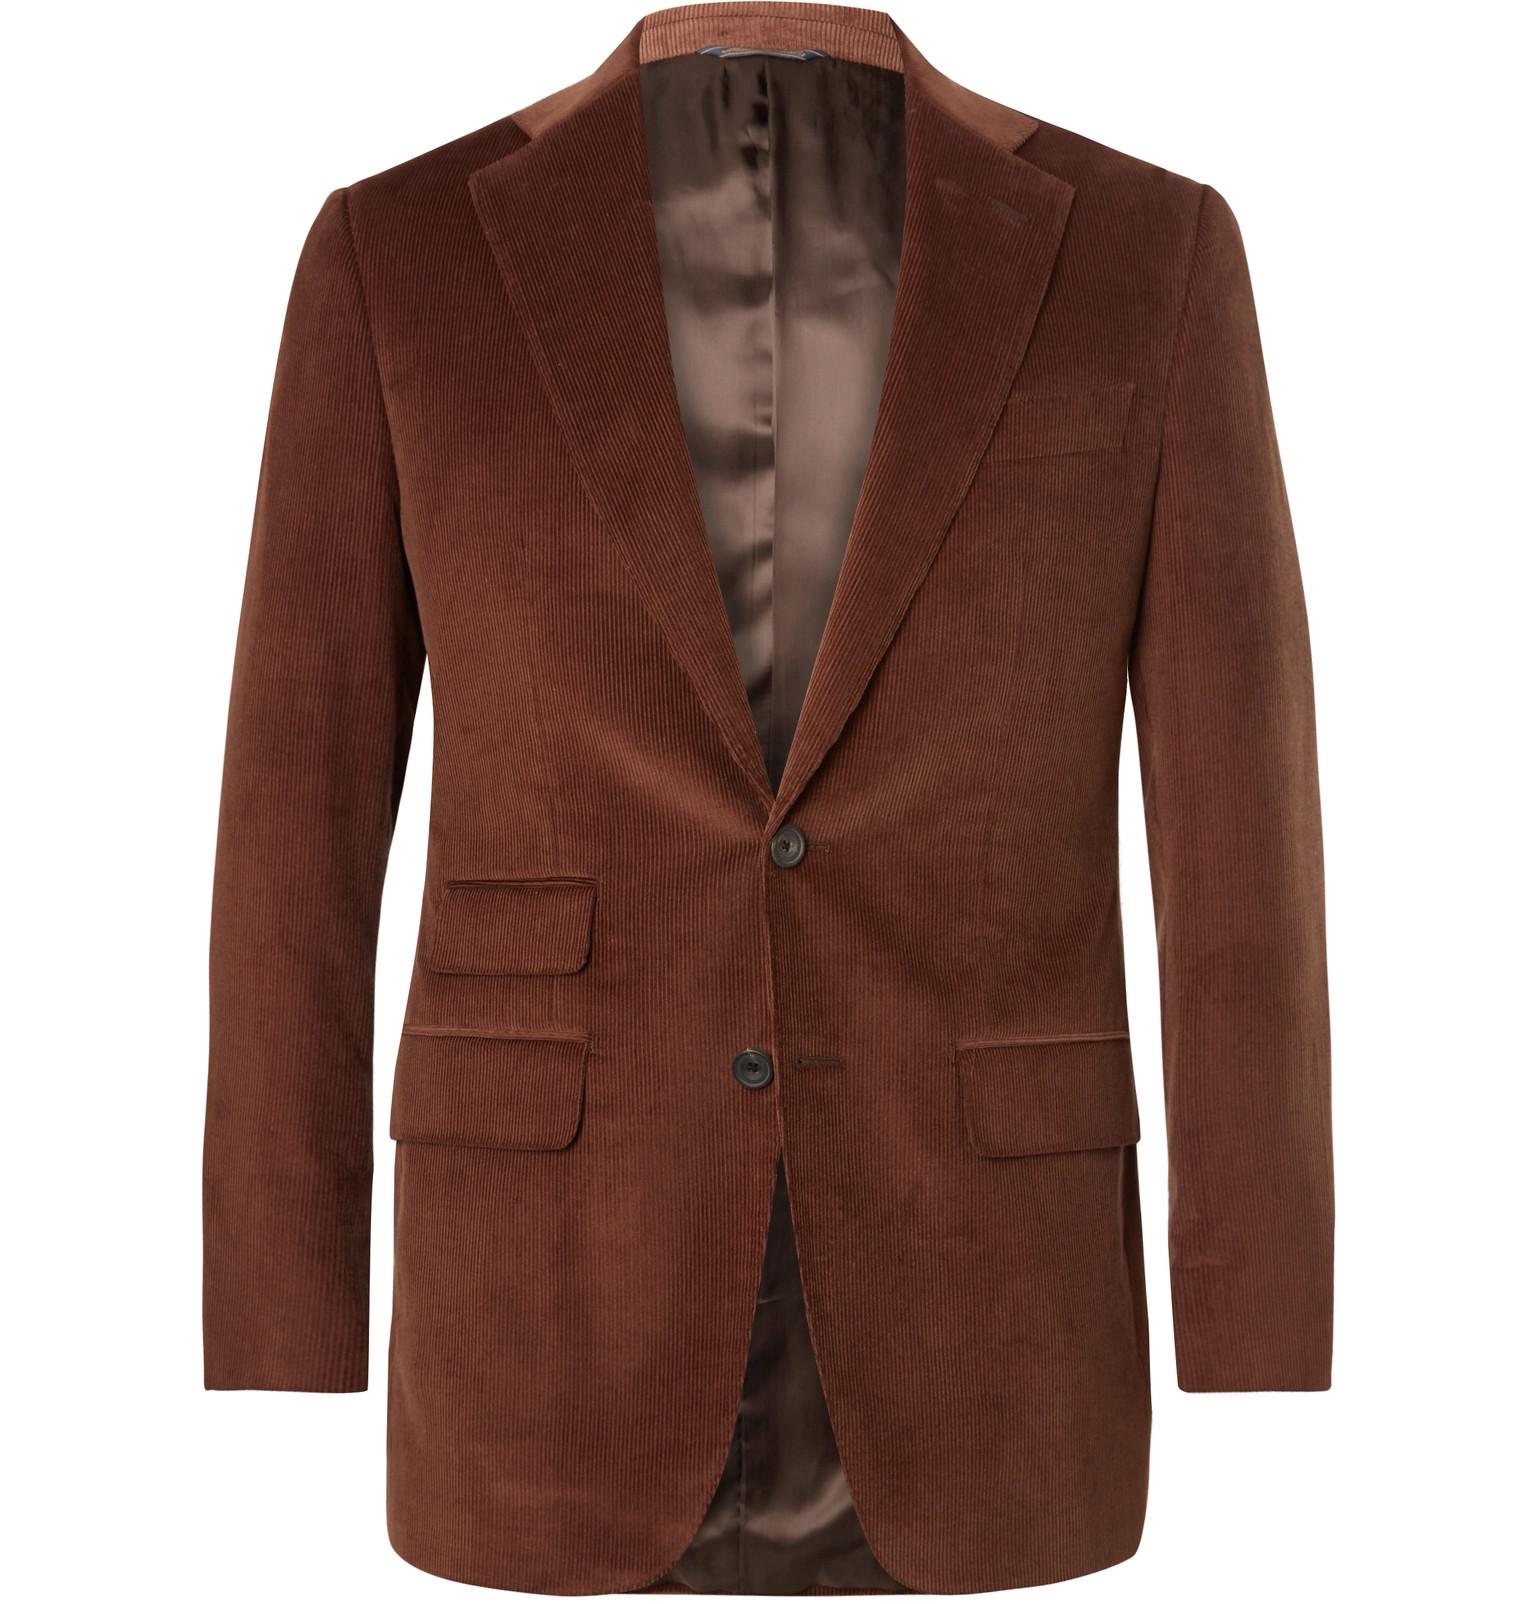 Thom sweeney Slim-fit Cotton And Cashmere-blend Corduroy Suit Jacket in ...